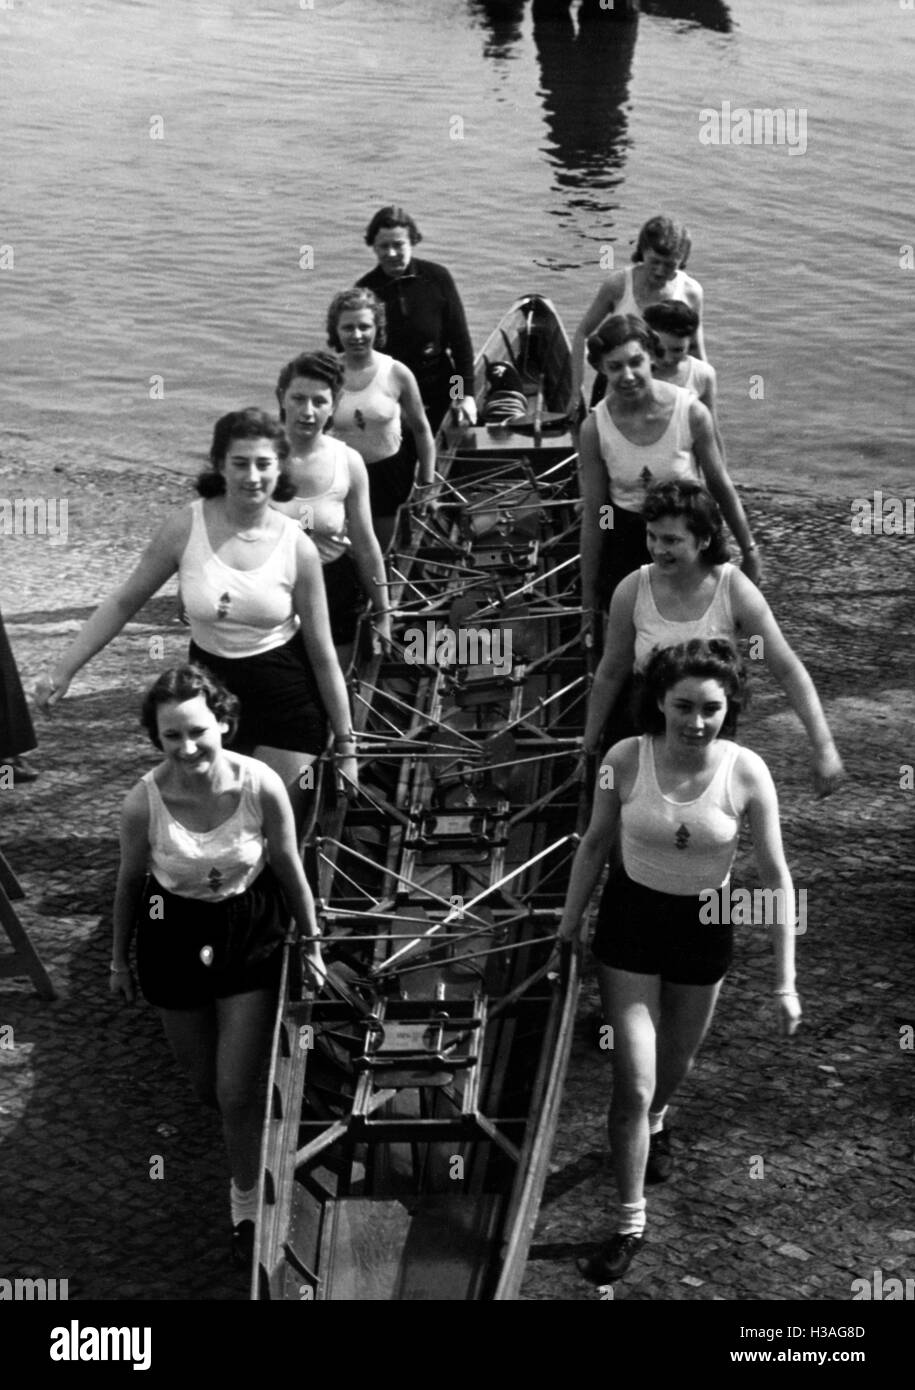 Members of the BDM-Werk Glaube und Schoenheit (BDM-Work, Faith and Beauty Society) while rowing, 1940 Stock Photo